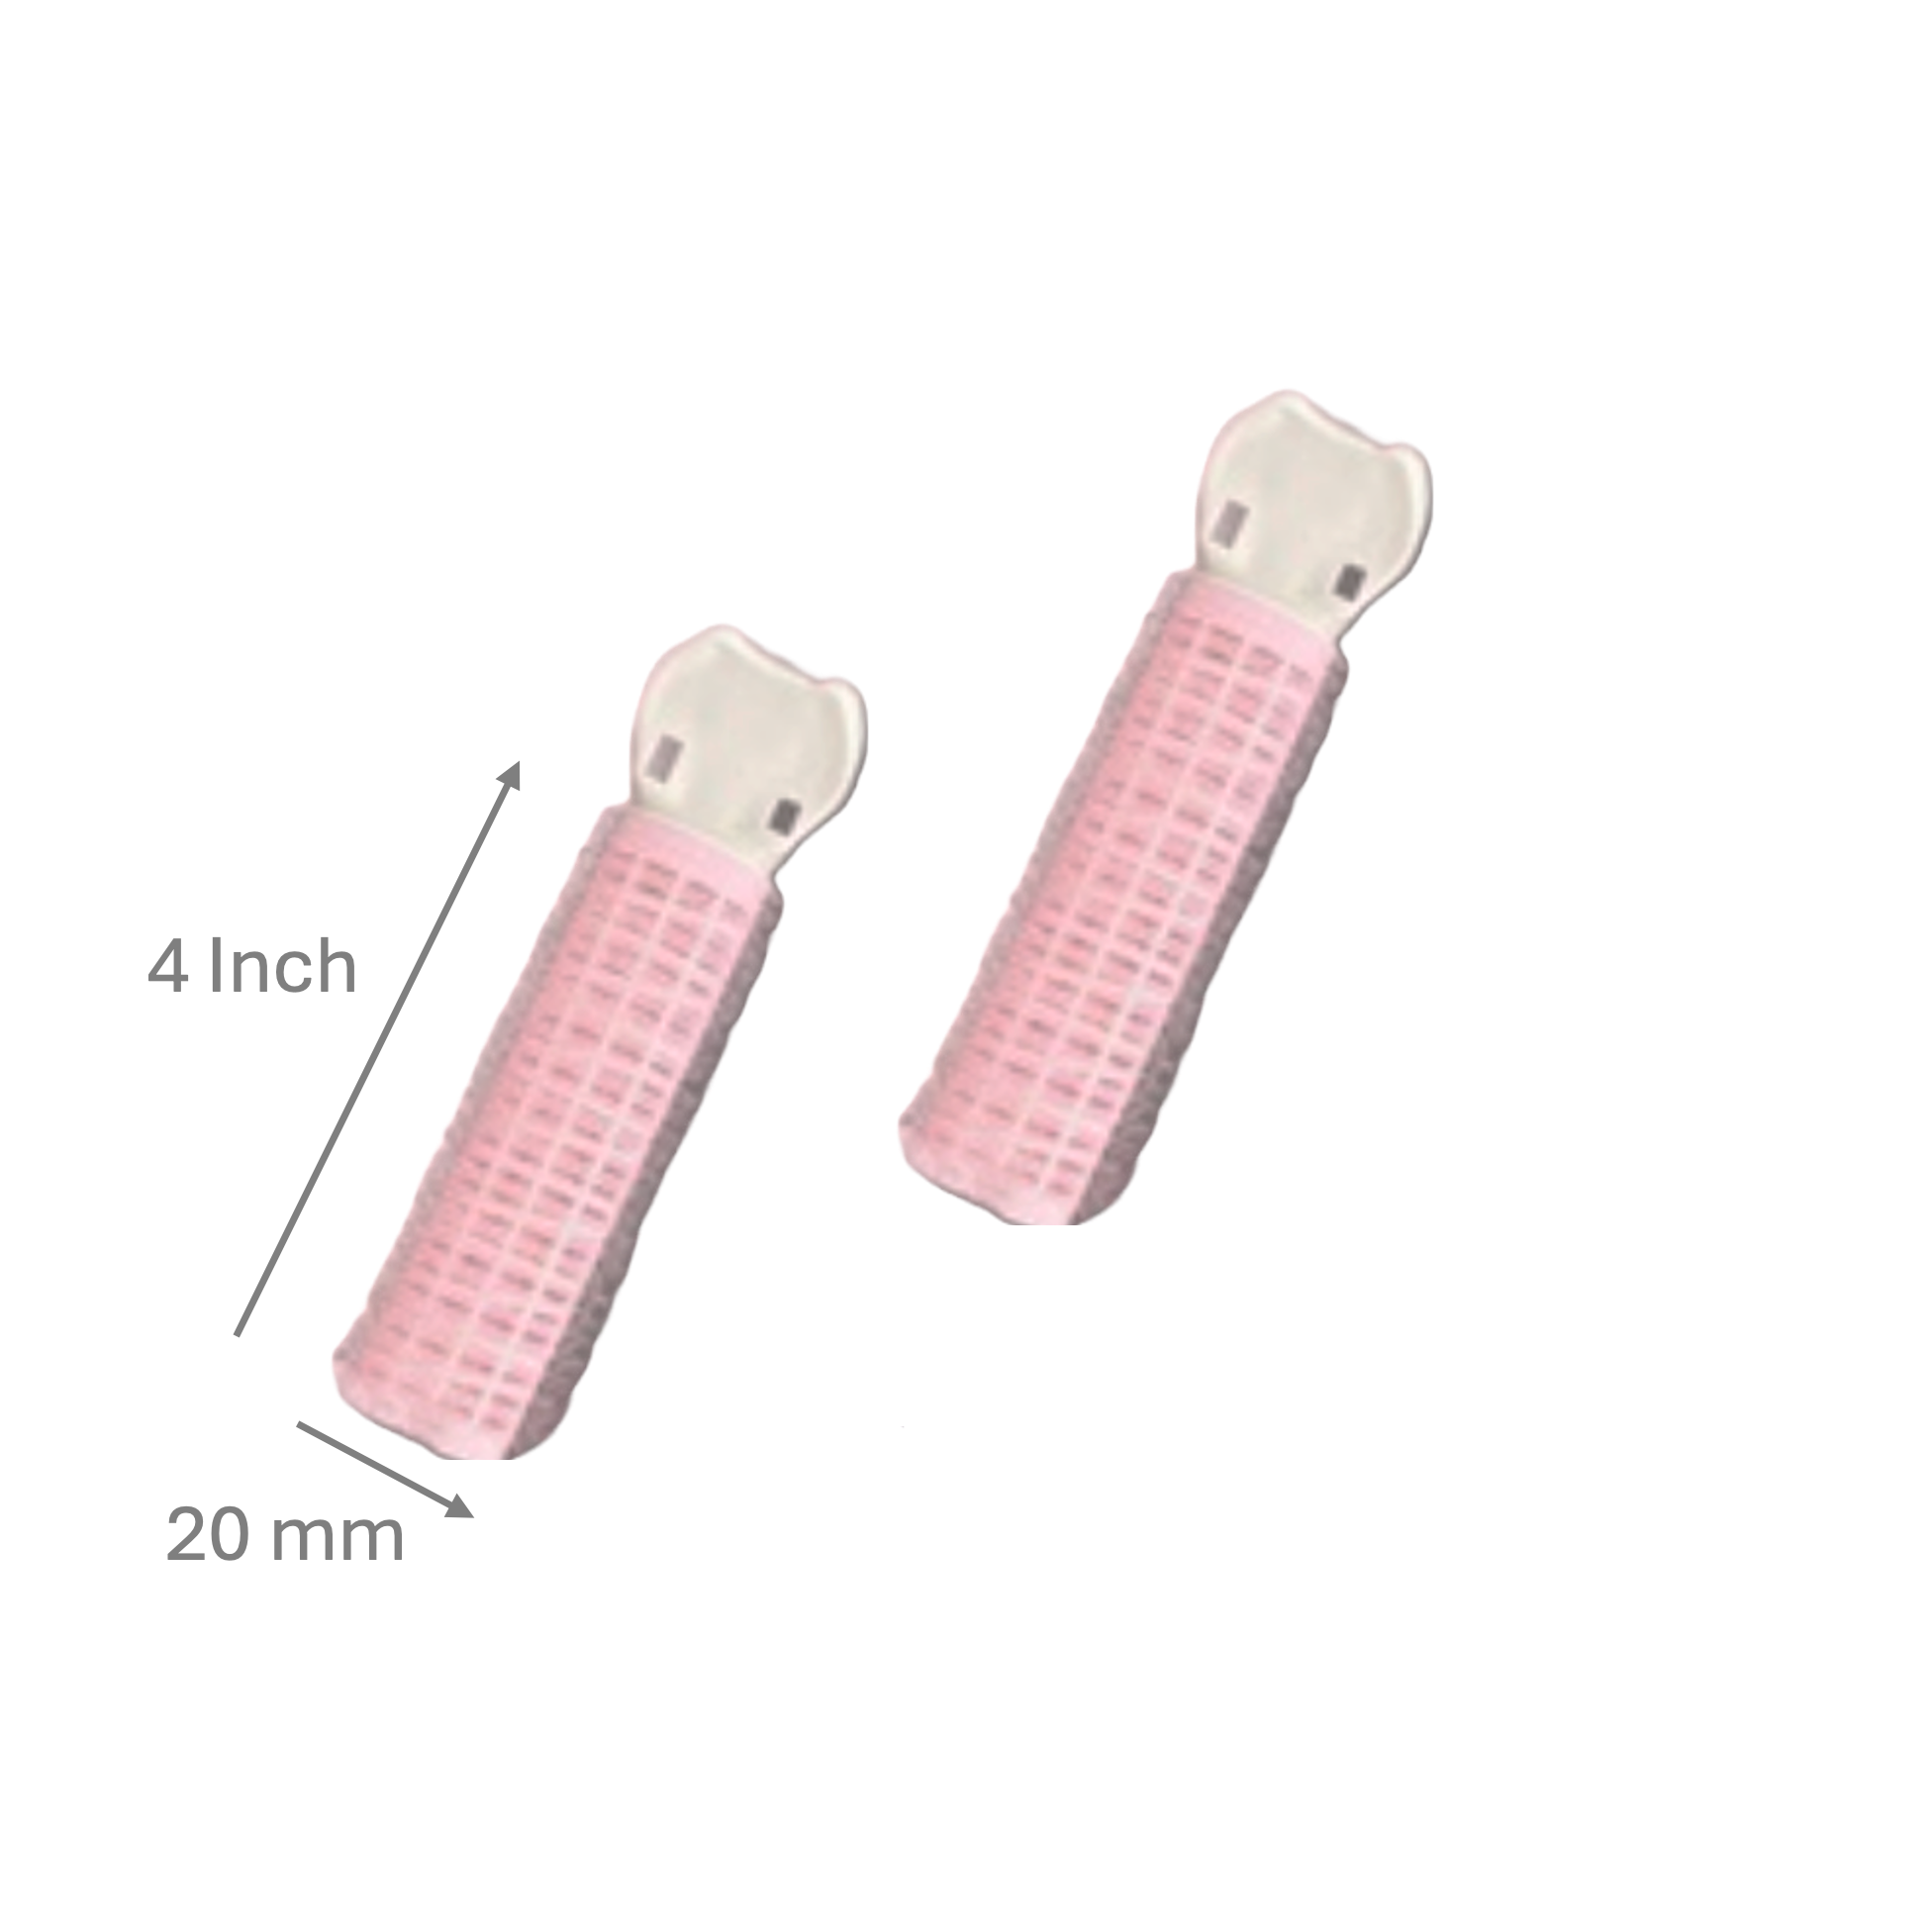 Hair Root Volume Clips For Fluffy Bangs & Natural Curls (2 Pack) HedeliE